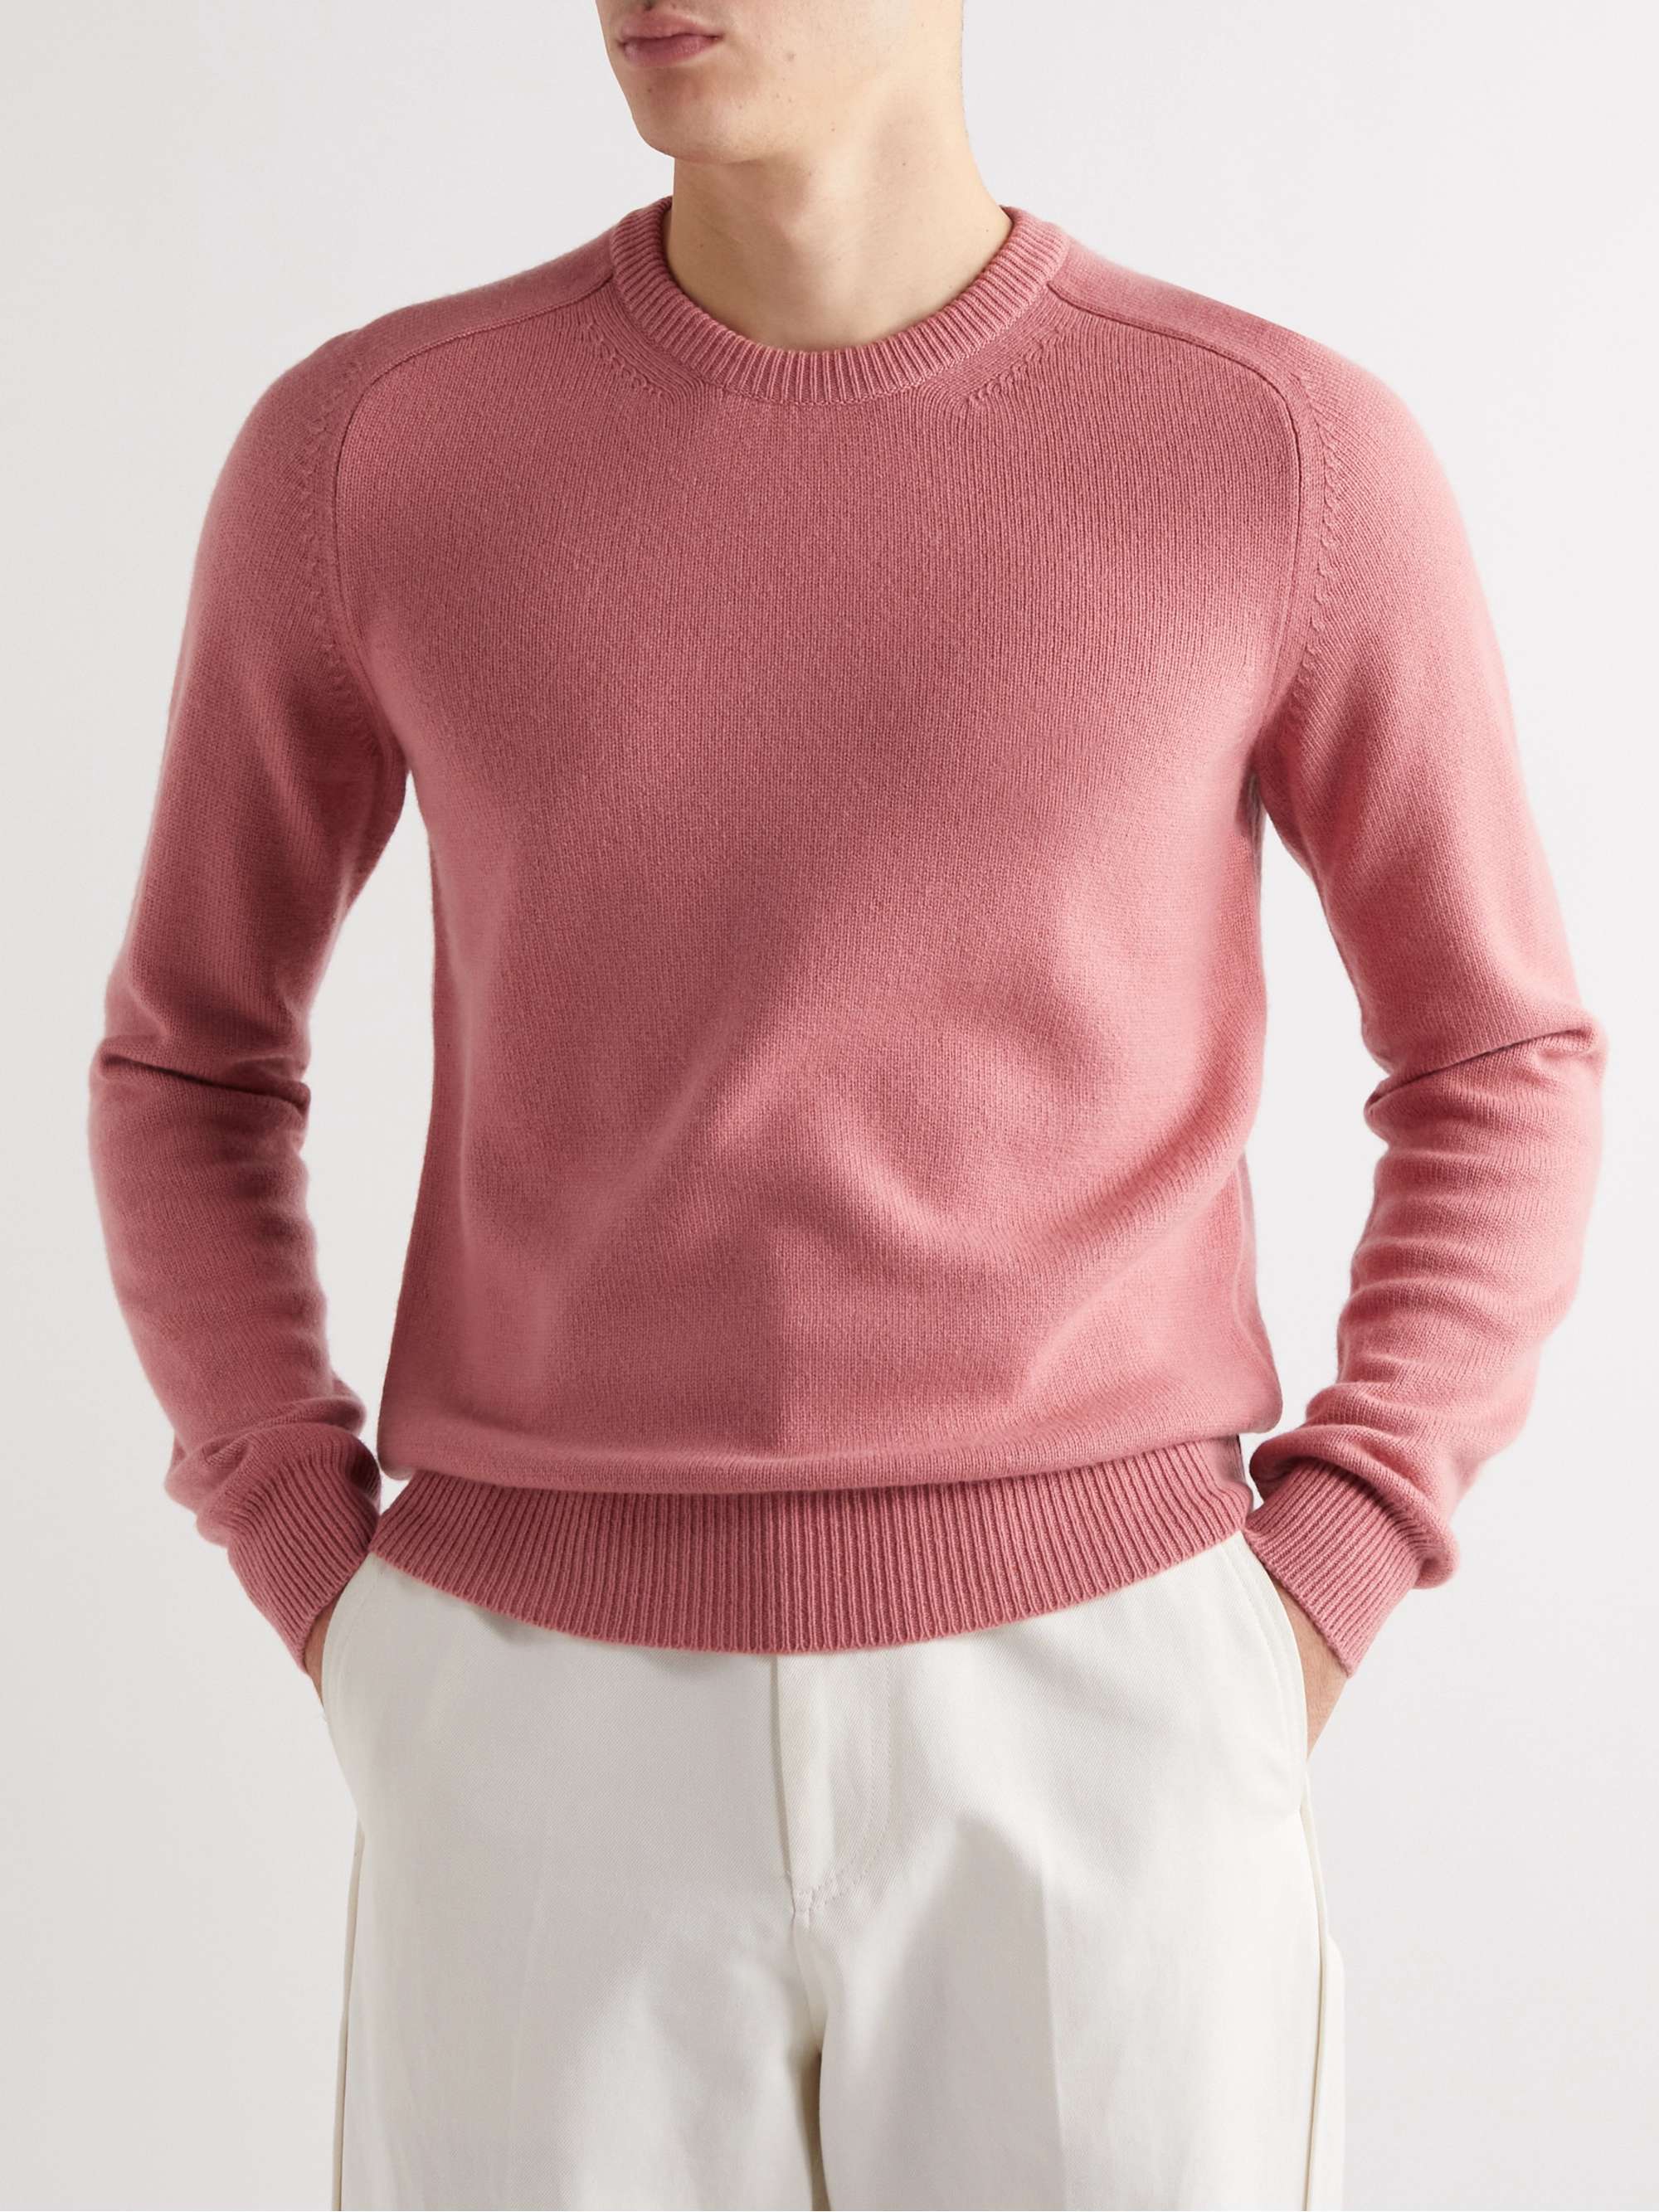 TOM FORD Slim-Fit Cashmere Sweater